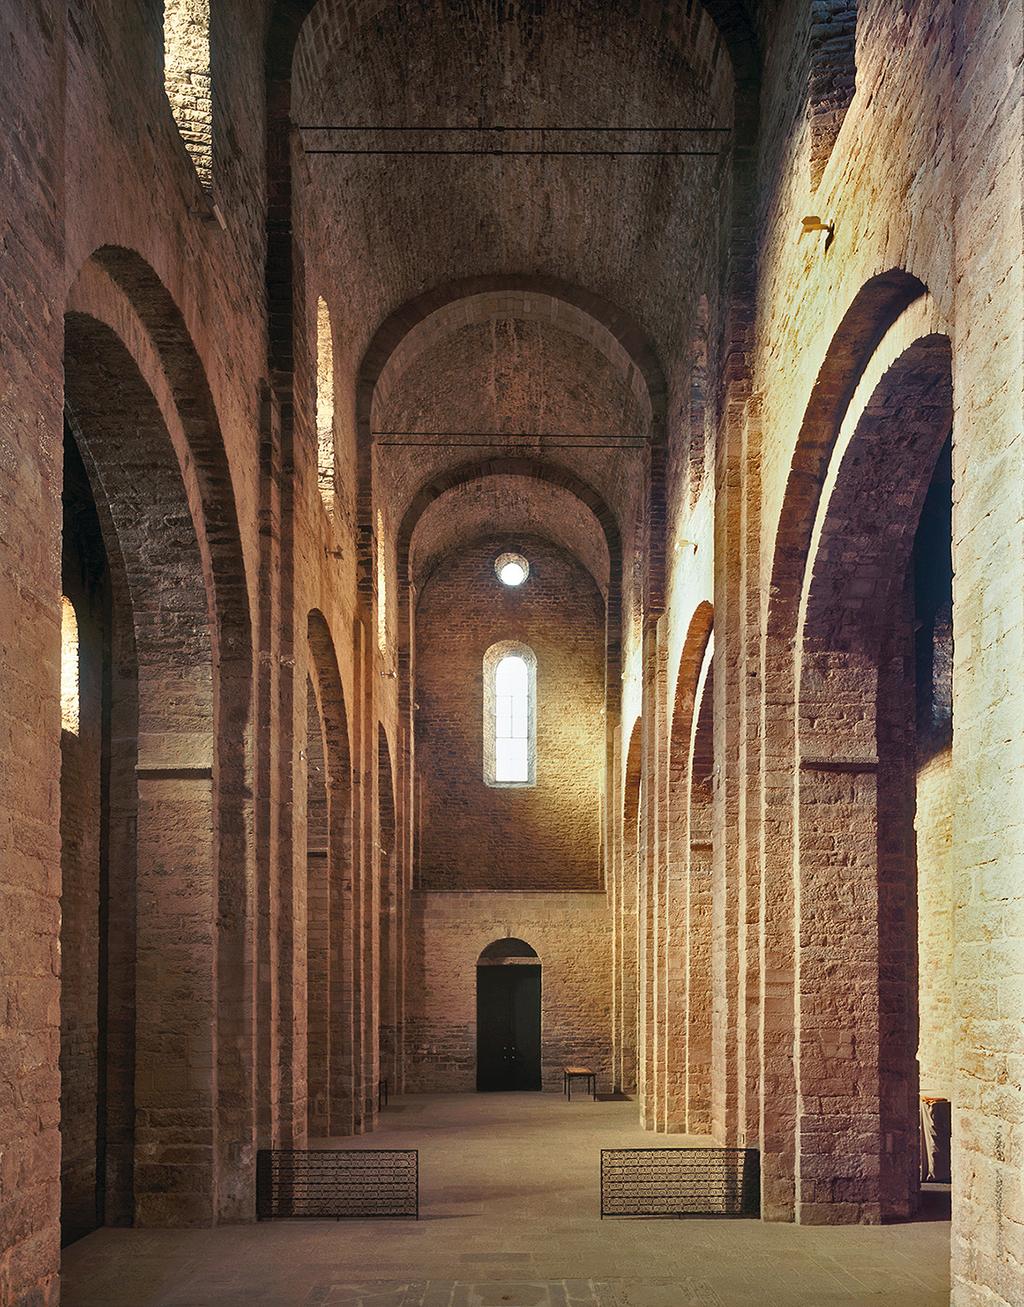 History 10 Nave 1019-1040 The nave consists of three aisles divided by columns with a complex cruciform section.